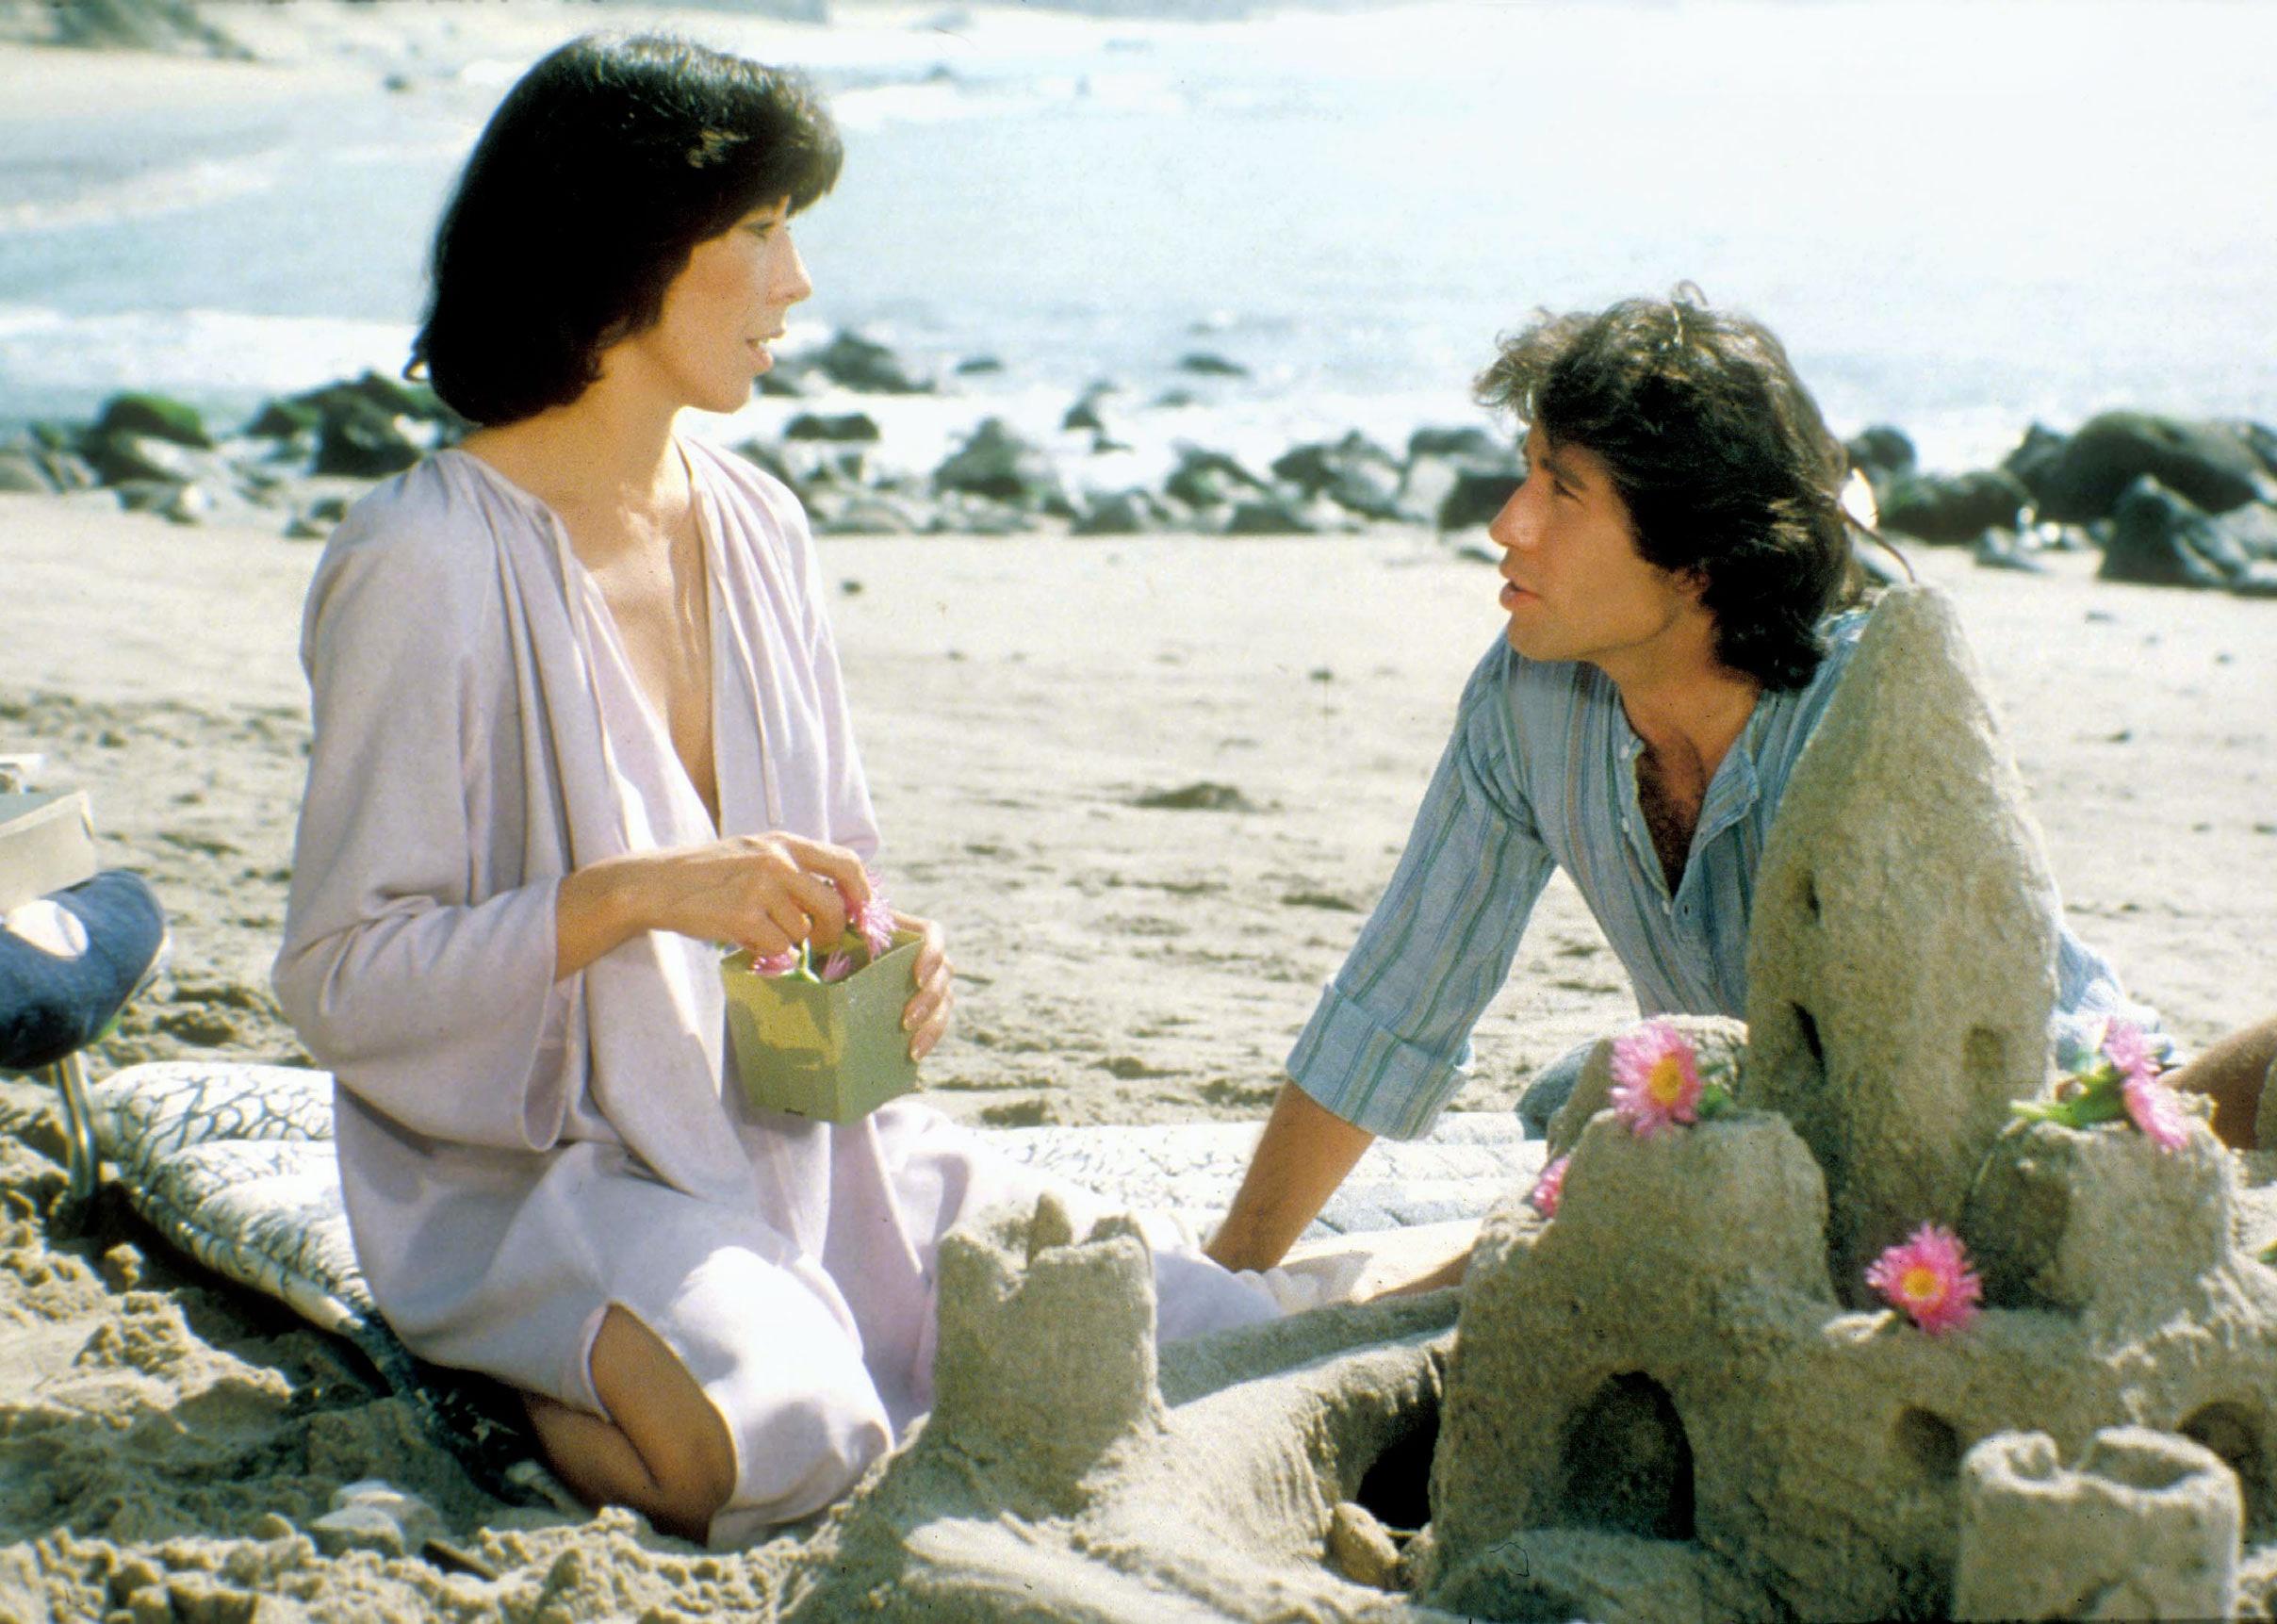 John Travolta and Lily Tomlin decorating a sandcastle on the beach.